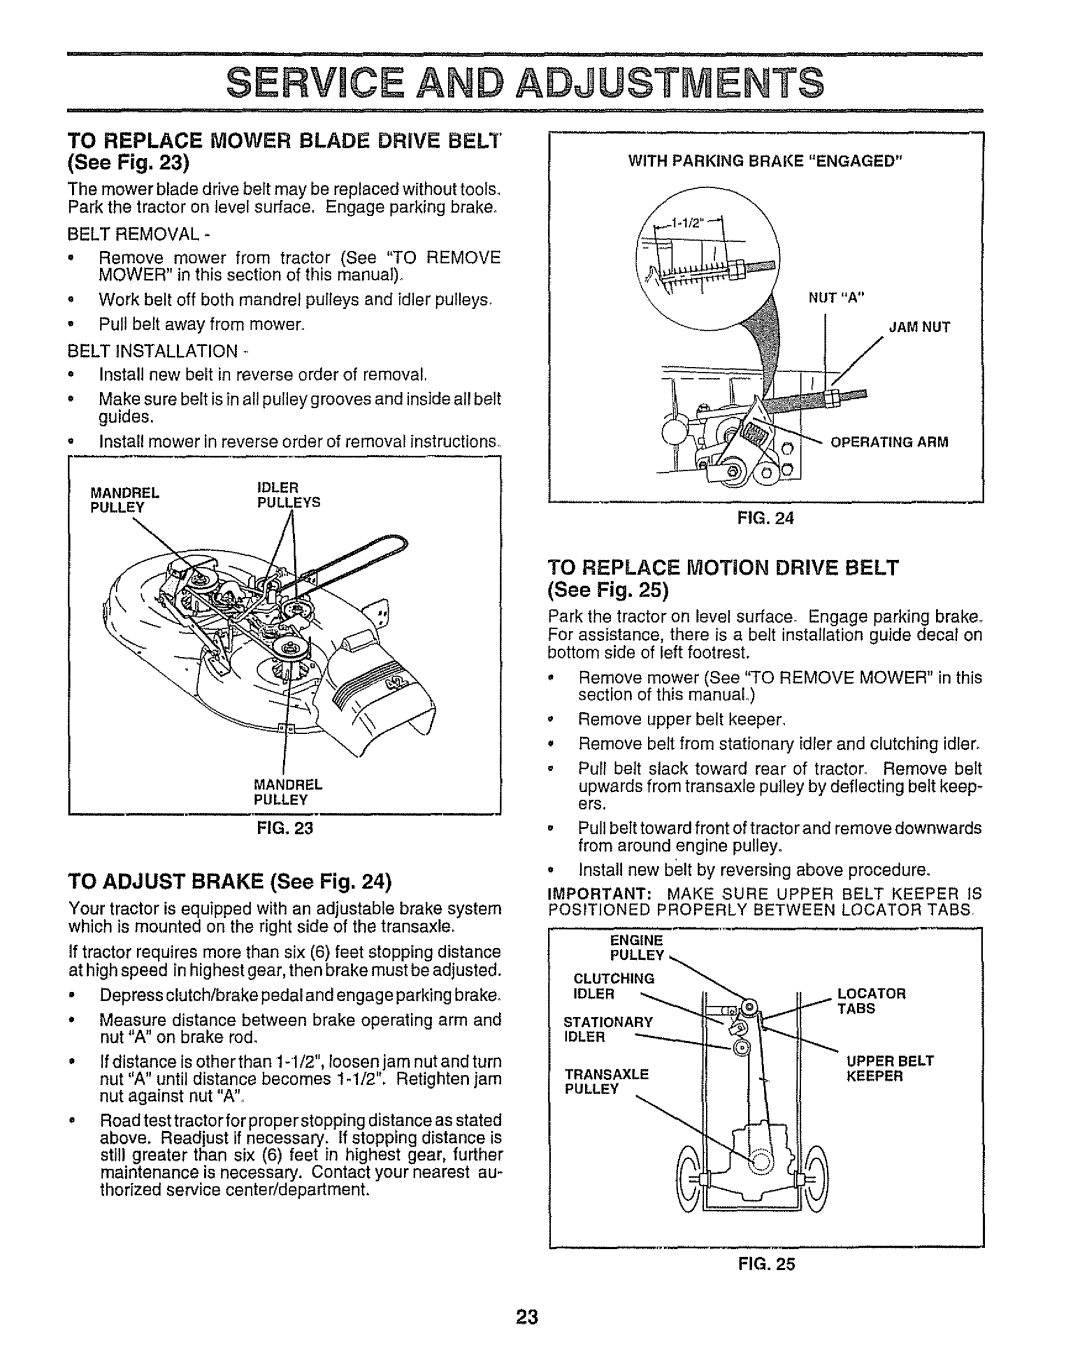 Sears 917.25958 manual Service And Adjustments, Oler, TRANSAXLEII -I1, It KEEPERUPPER BELT, See Fig 